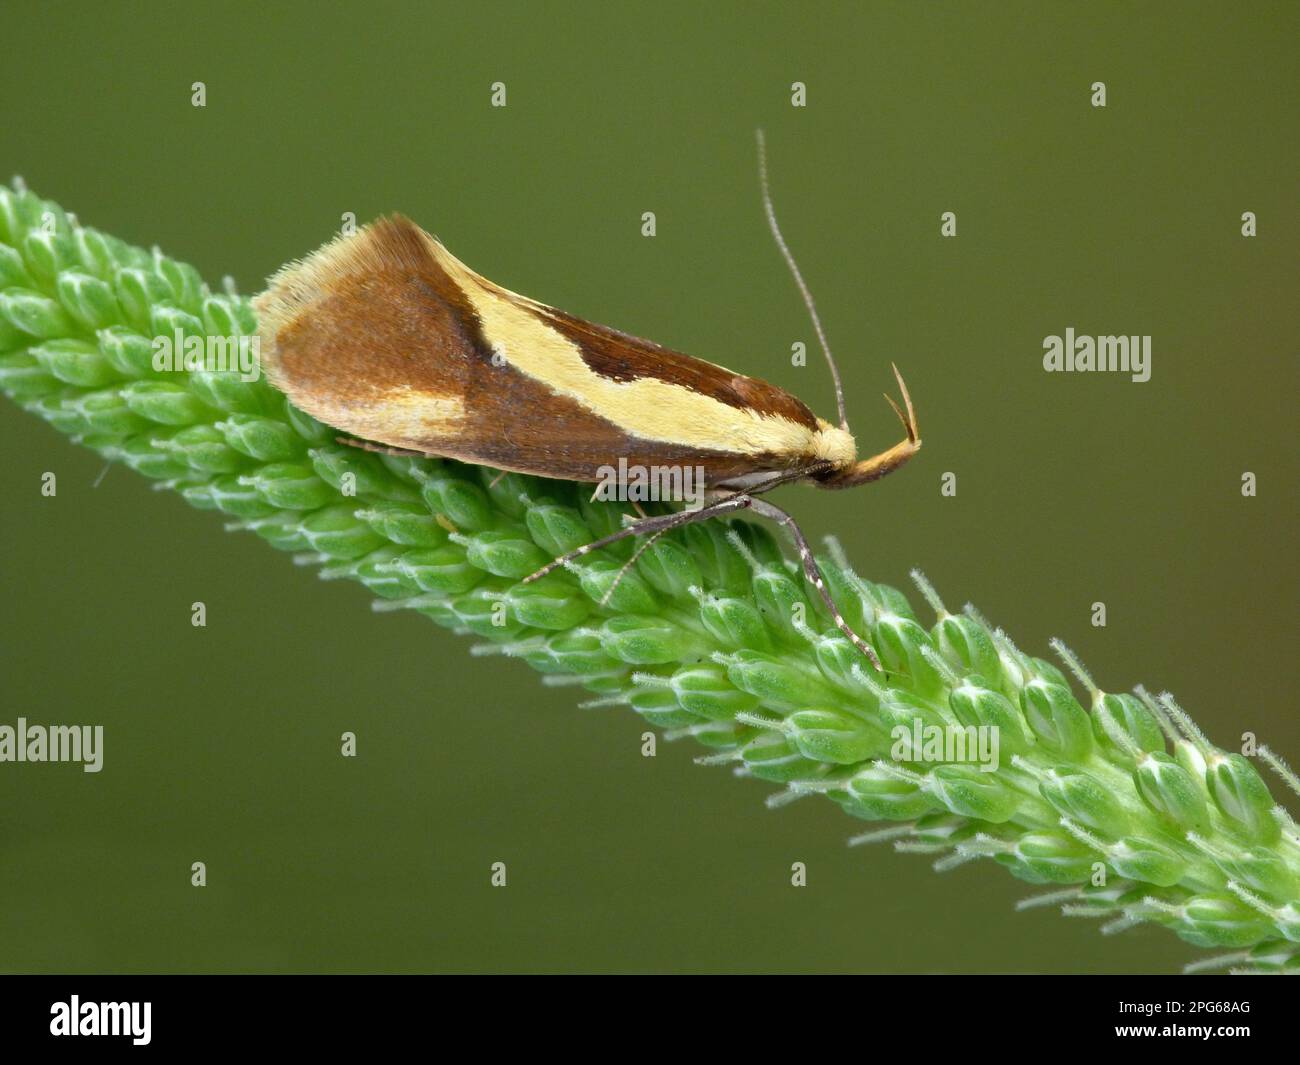 Large gypsy moth (Harpella forficella), adult, resting on the inflorescence of the large broad-leaved plantain (Plantago major), Cannobina valley Stock Photo